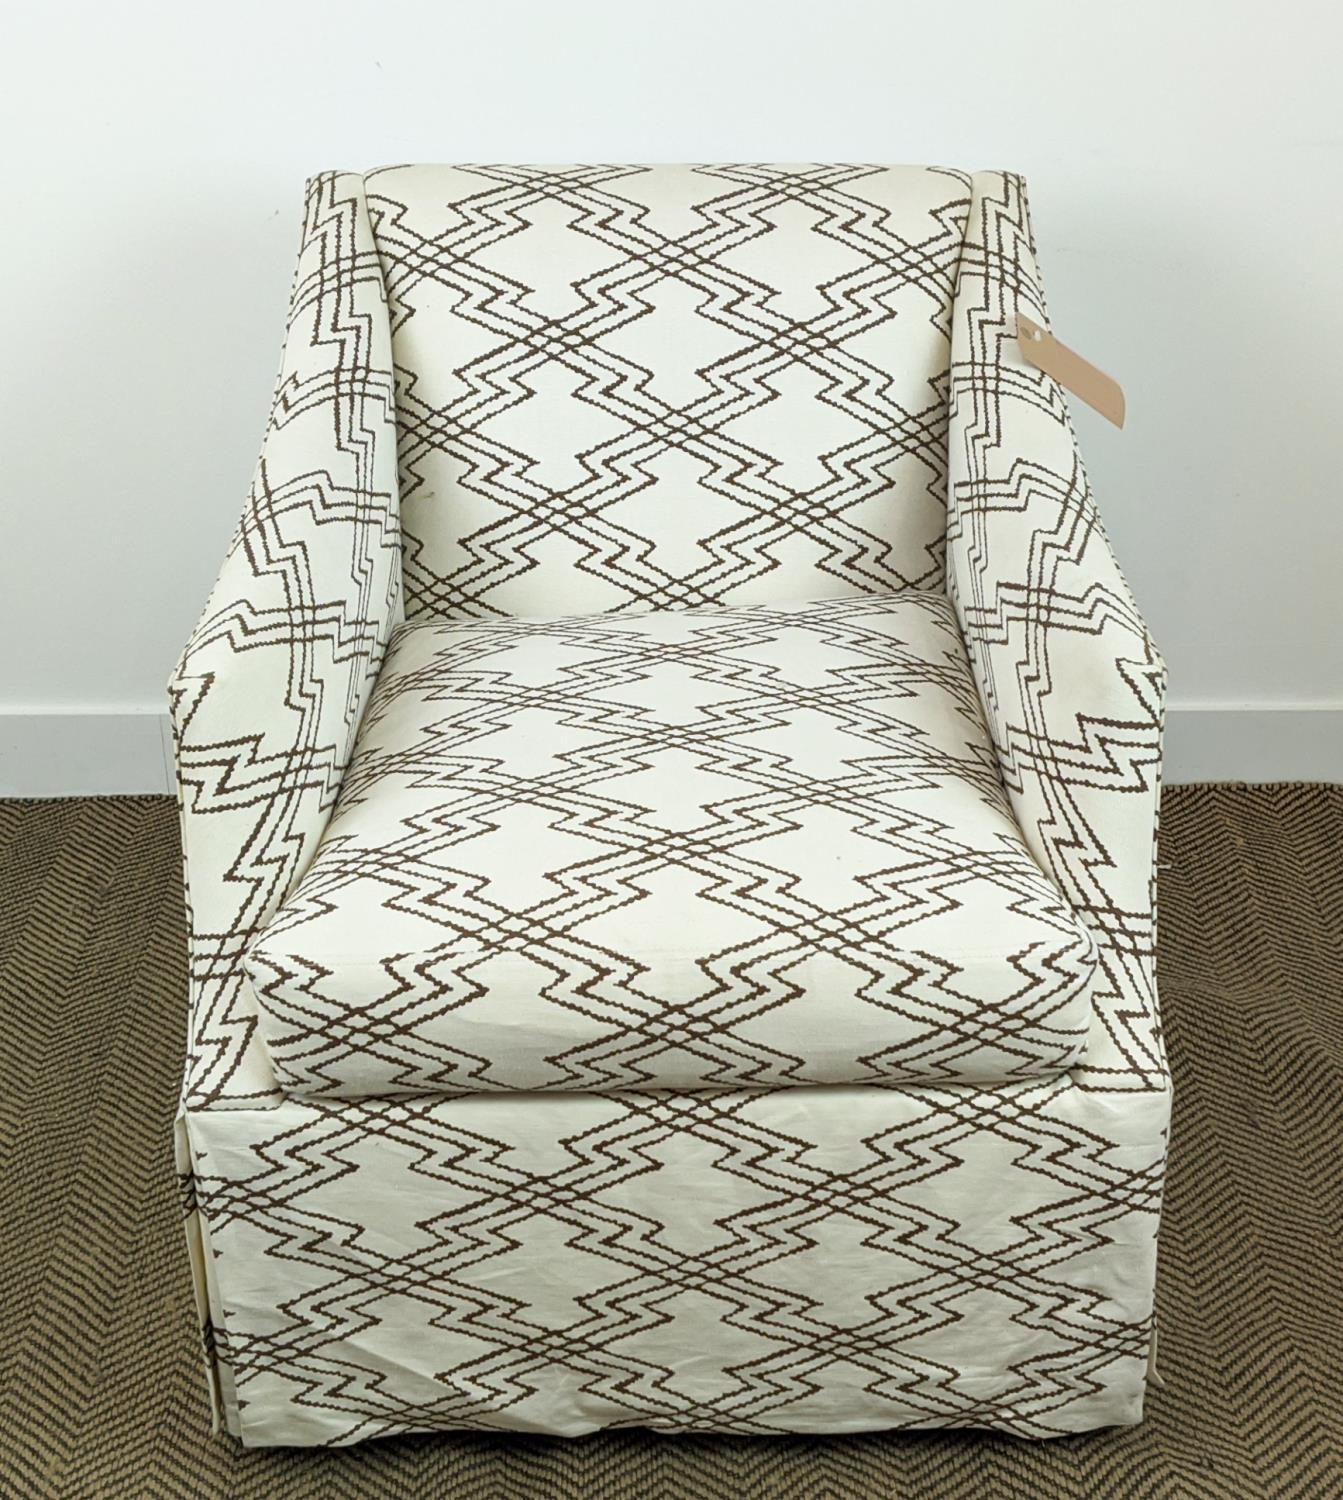 PAOLO MOSCHINO CHARLES ARMCHAIR, in via Krupp bis brown upholstery, 74cm W. - Image 8 of 8